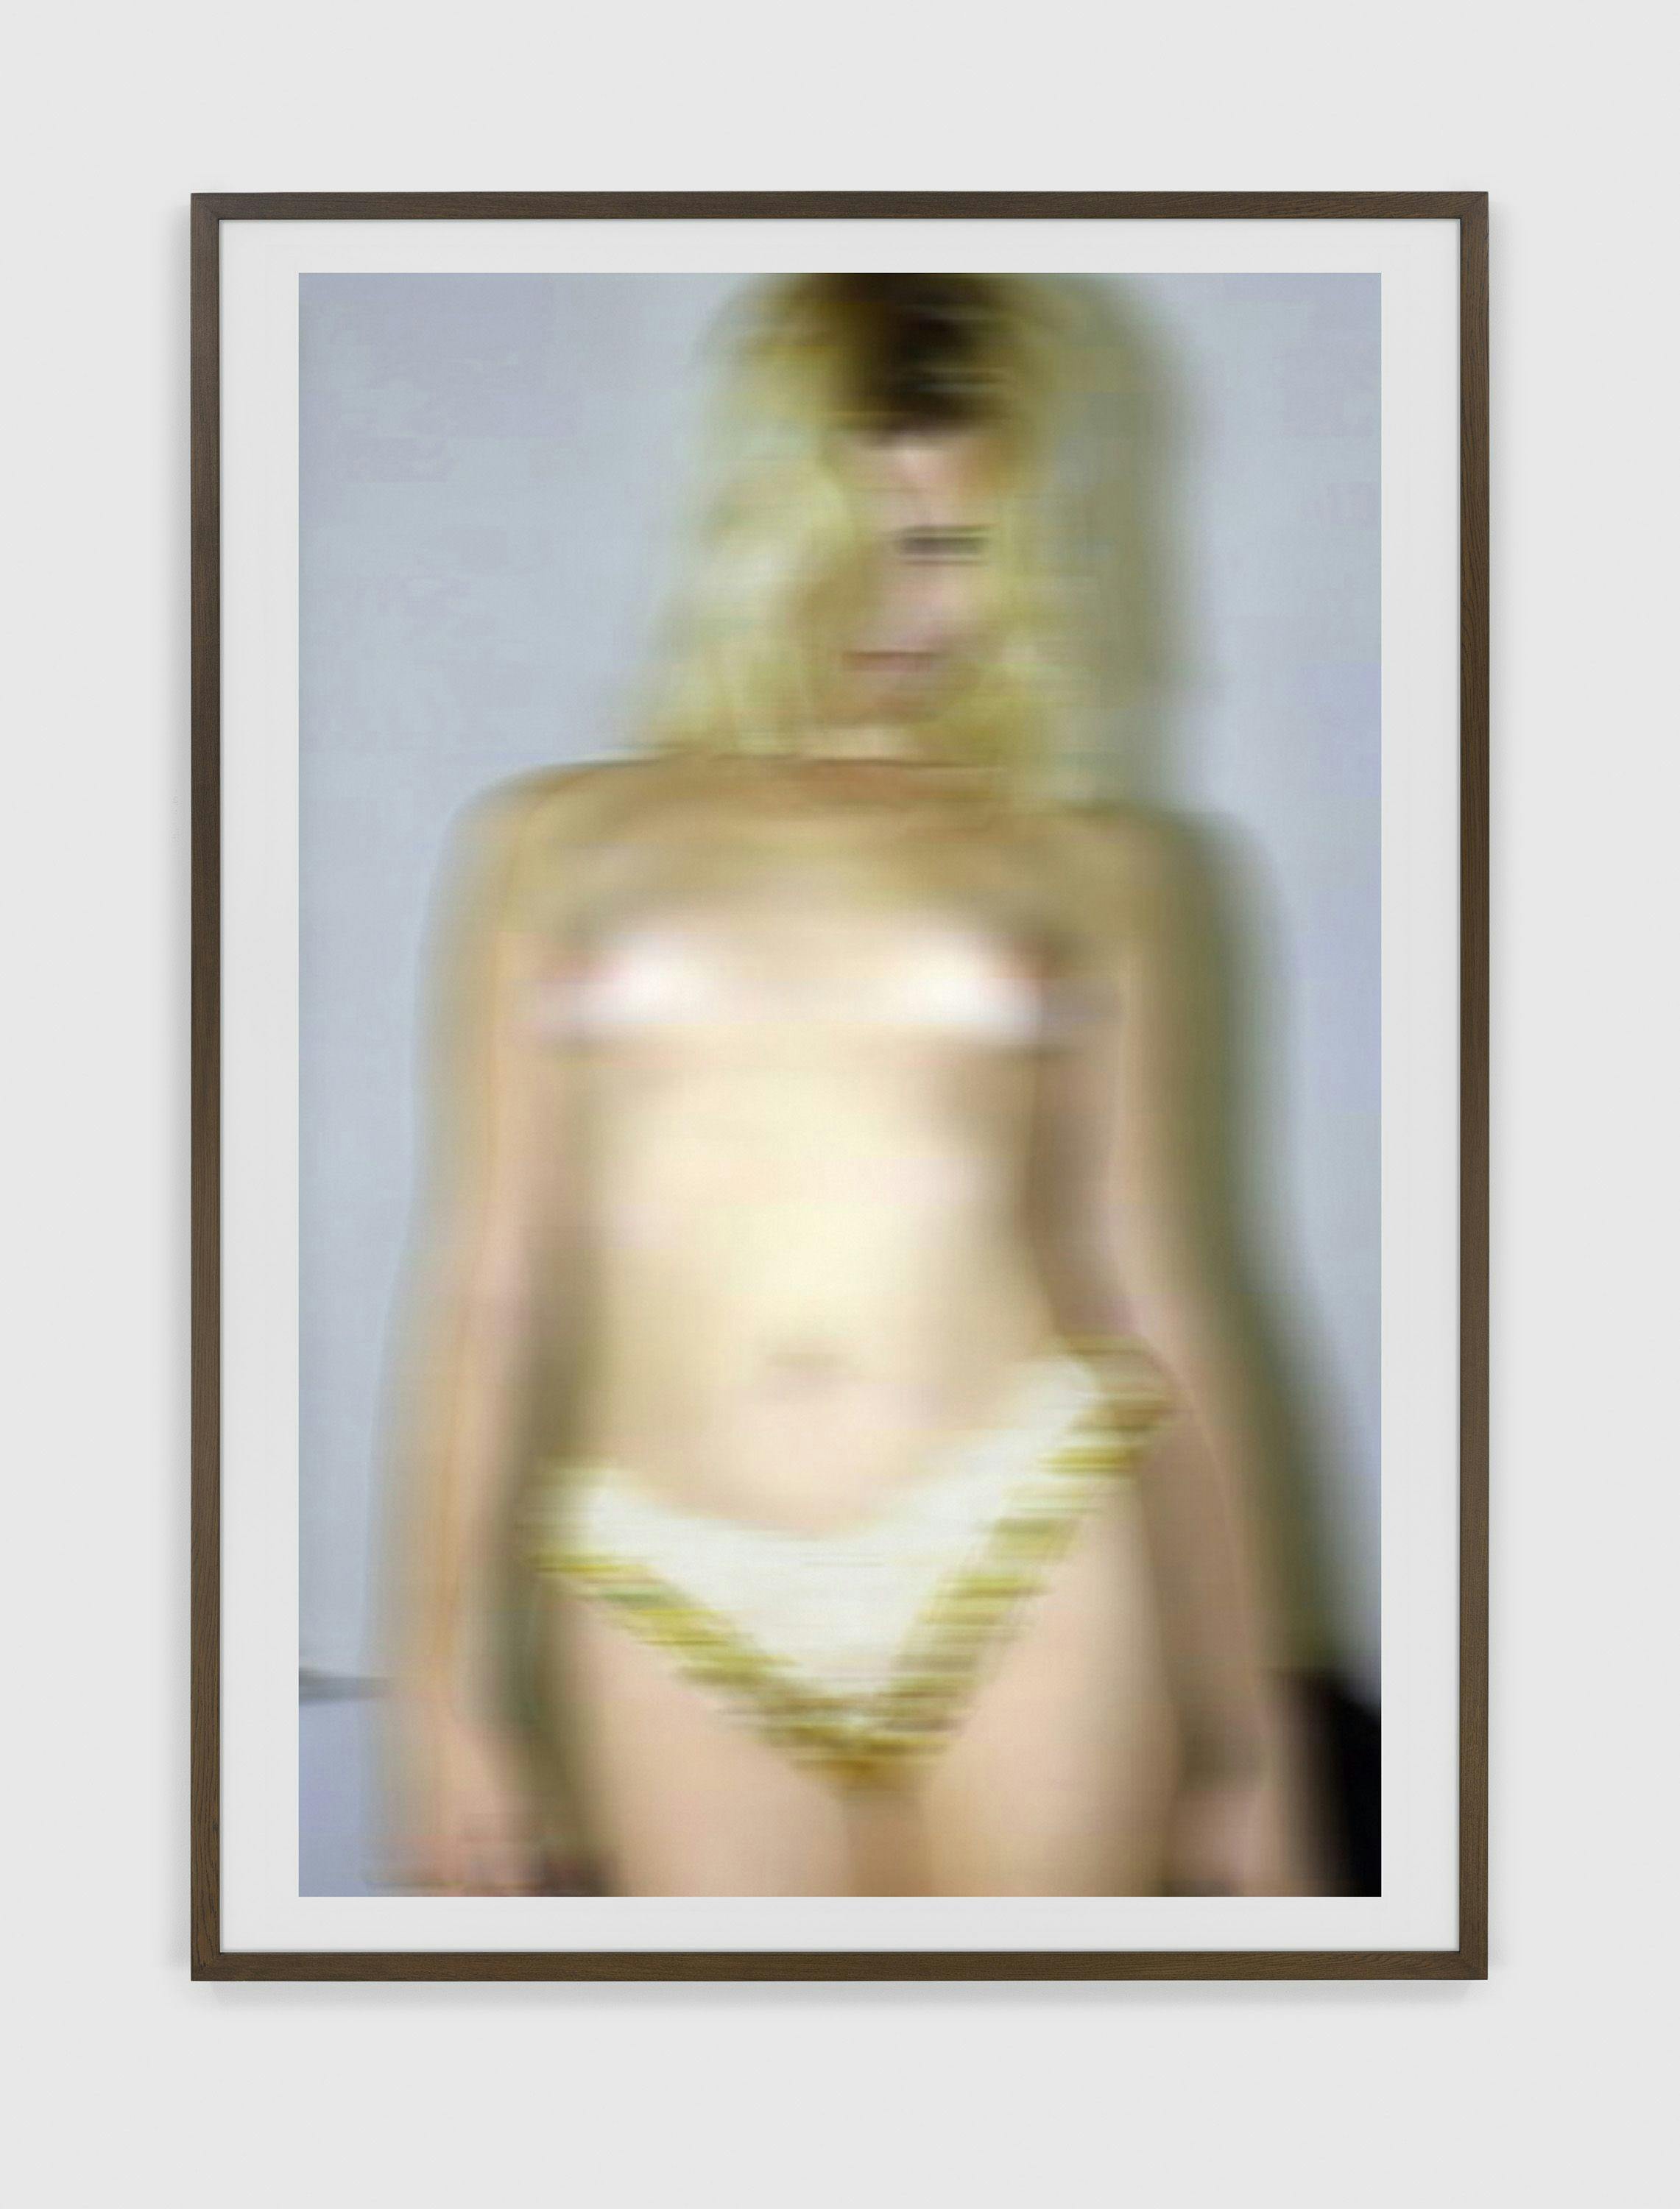 A chromogenic print by Thomas Ruff titled nudes yv16, dated 2000.